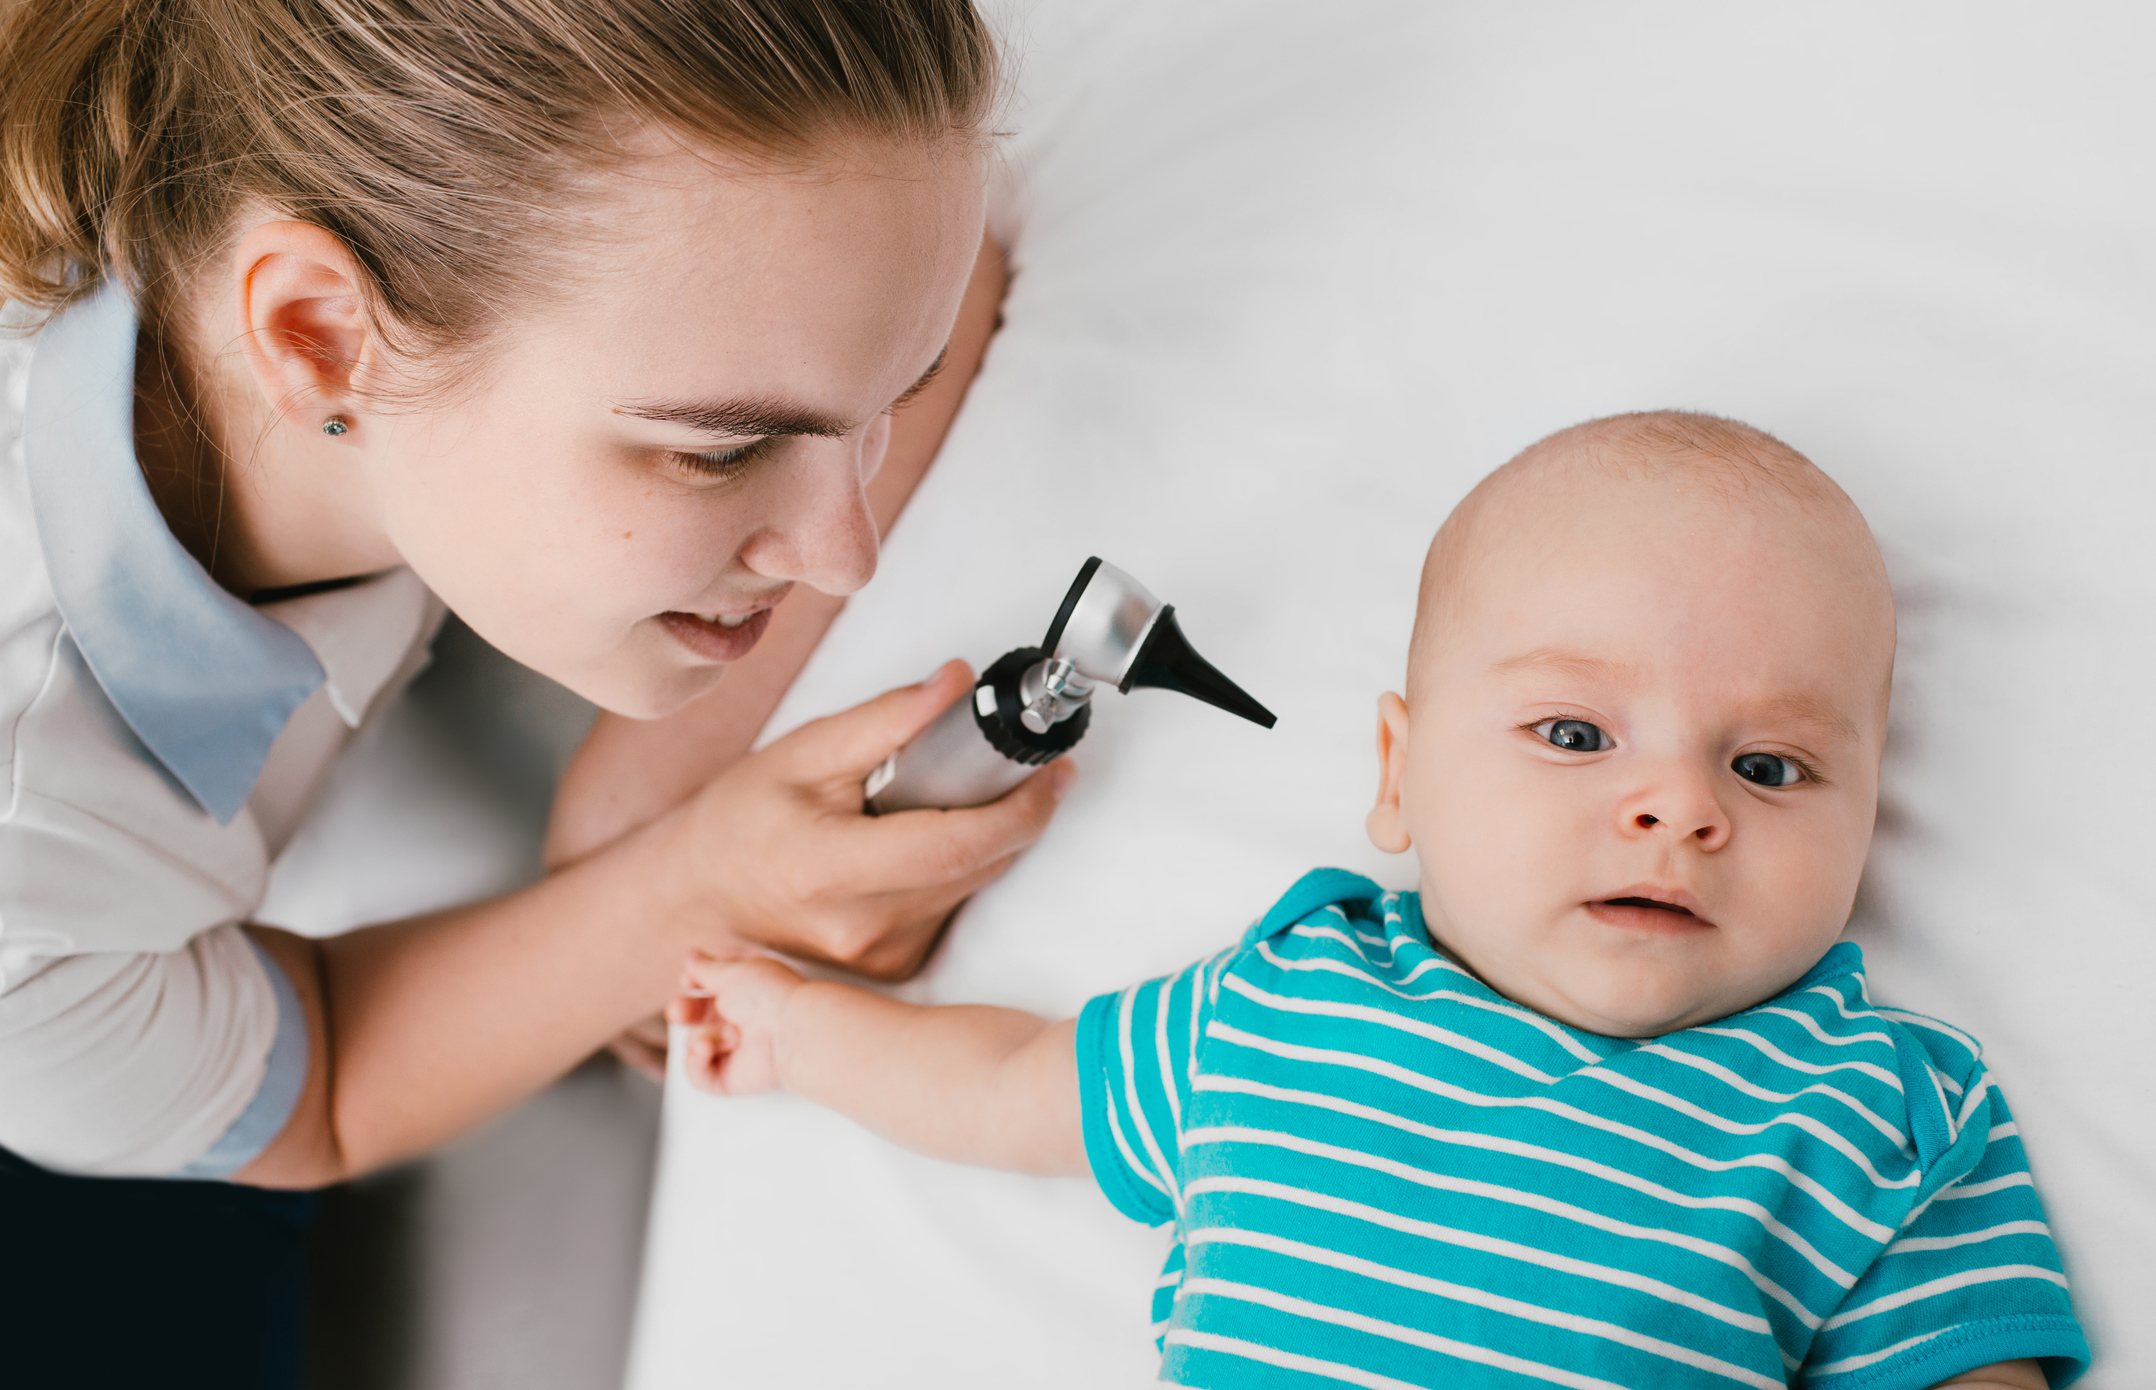 Recognizing Signs of Eye Disorders in Newborns